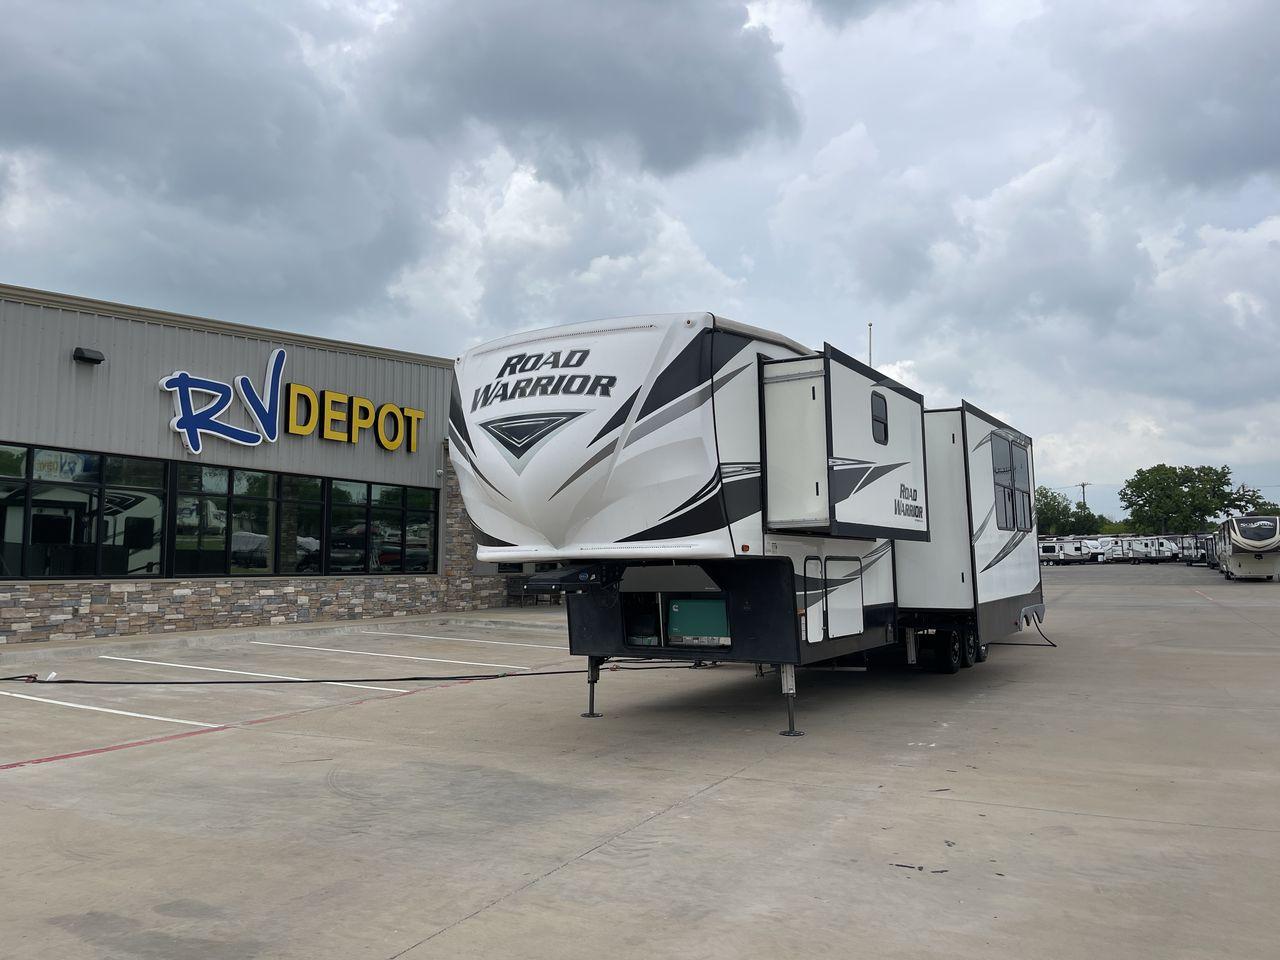 2019 HEARTLAND ROAD WARRIOR 427RW (5SFCG4435KE) , Length: 44.08 ft. | Dry Weight: 16,400 lbs. | Gross Weight: 20,000 lbs. | Slides: 2 transmission, located at 4319 N Main Street, Cleburne, TX, 76033, (817) 221-0660, 32.435829, -97.384178 - The 2019 Heartland Road Warrior 427RW fifth wheel toy hauler is ready for your next journey. The length of this amazing RV is 44.08 feet, its dry weight is 16,400 lbs and its gross weight is 20,000 lbs. This makes it stable and long-lasting on the road. This RV is strong and stylish, with two slides - Photo #0